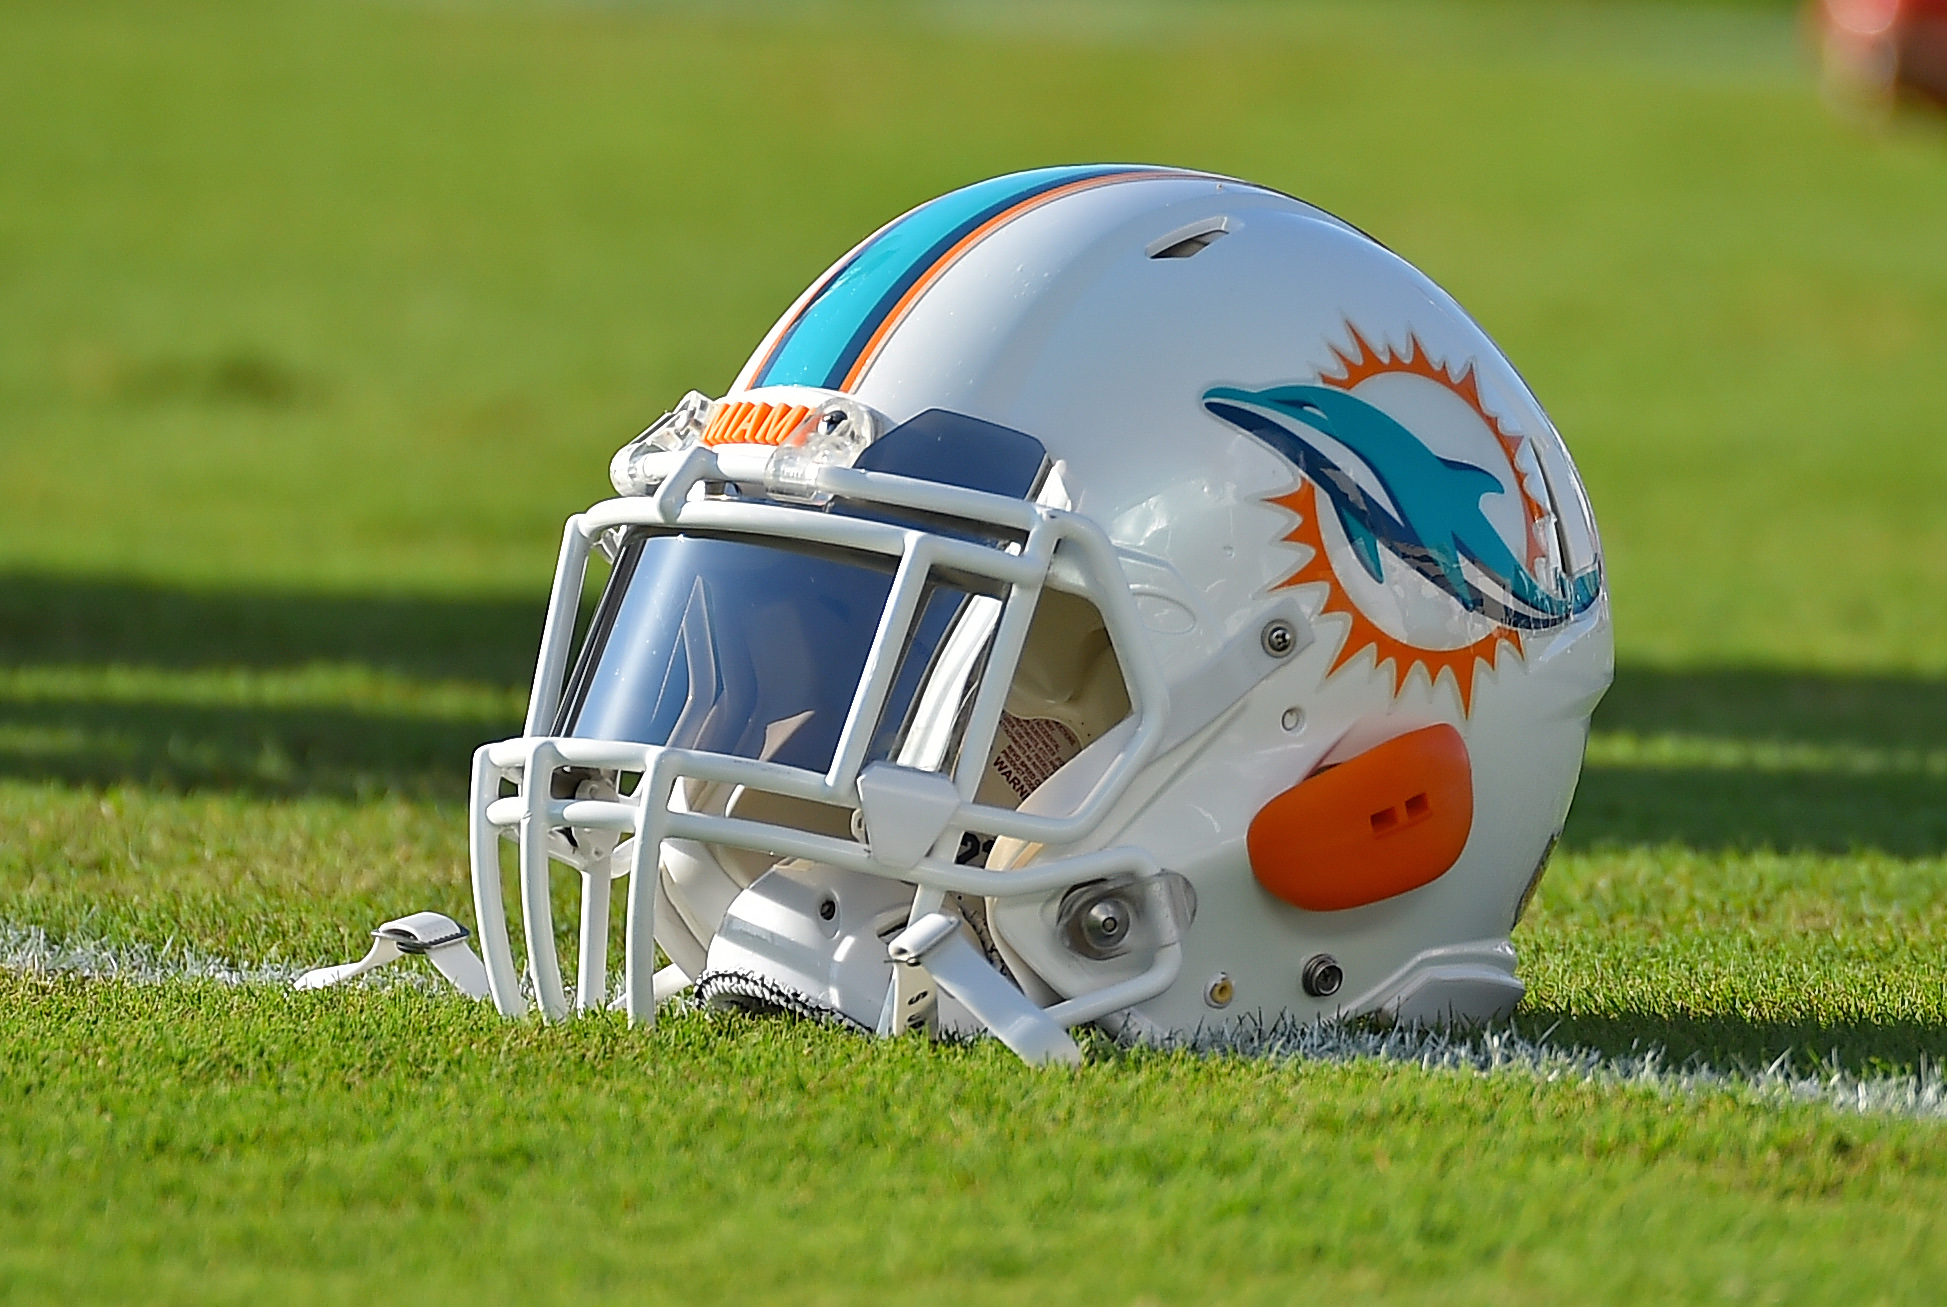 Does your phone need an overhaul? The Dolphins have your new wallpaper